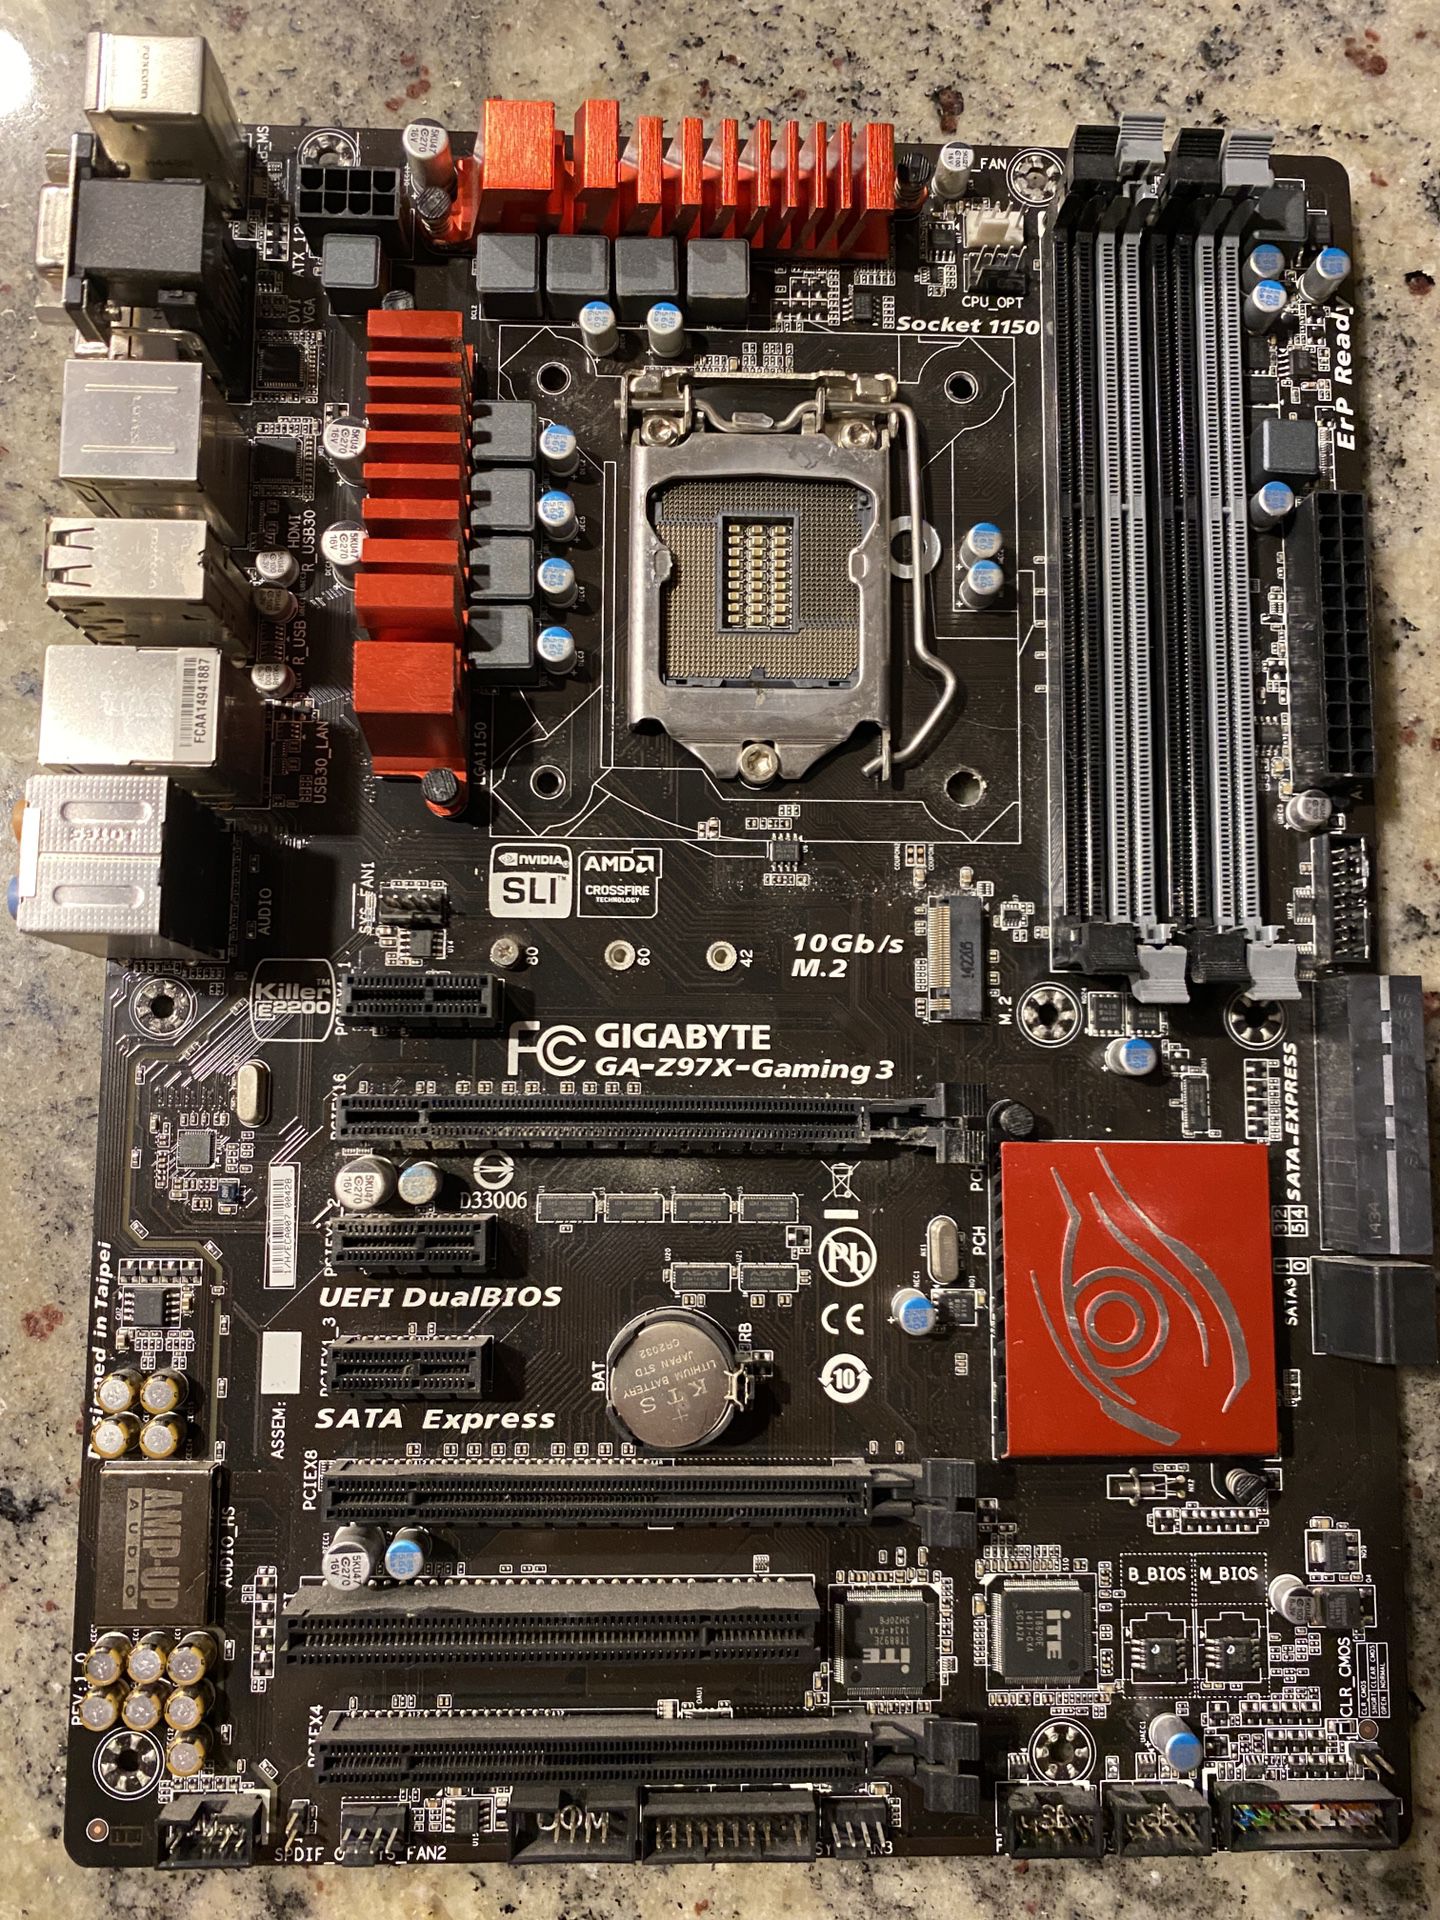 Gigabyte z97x motherboard read ad completely